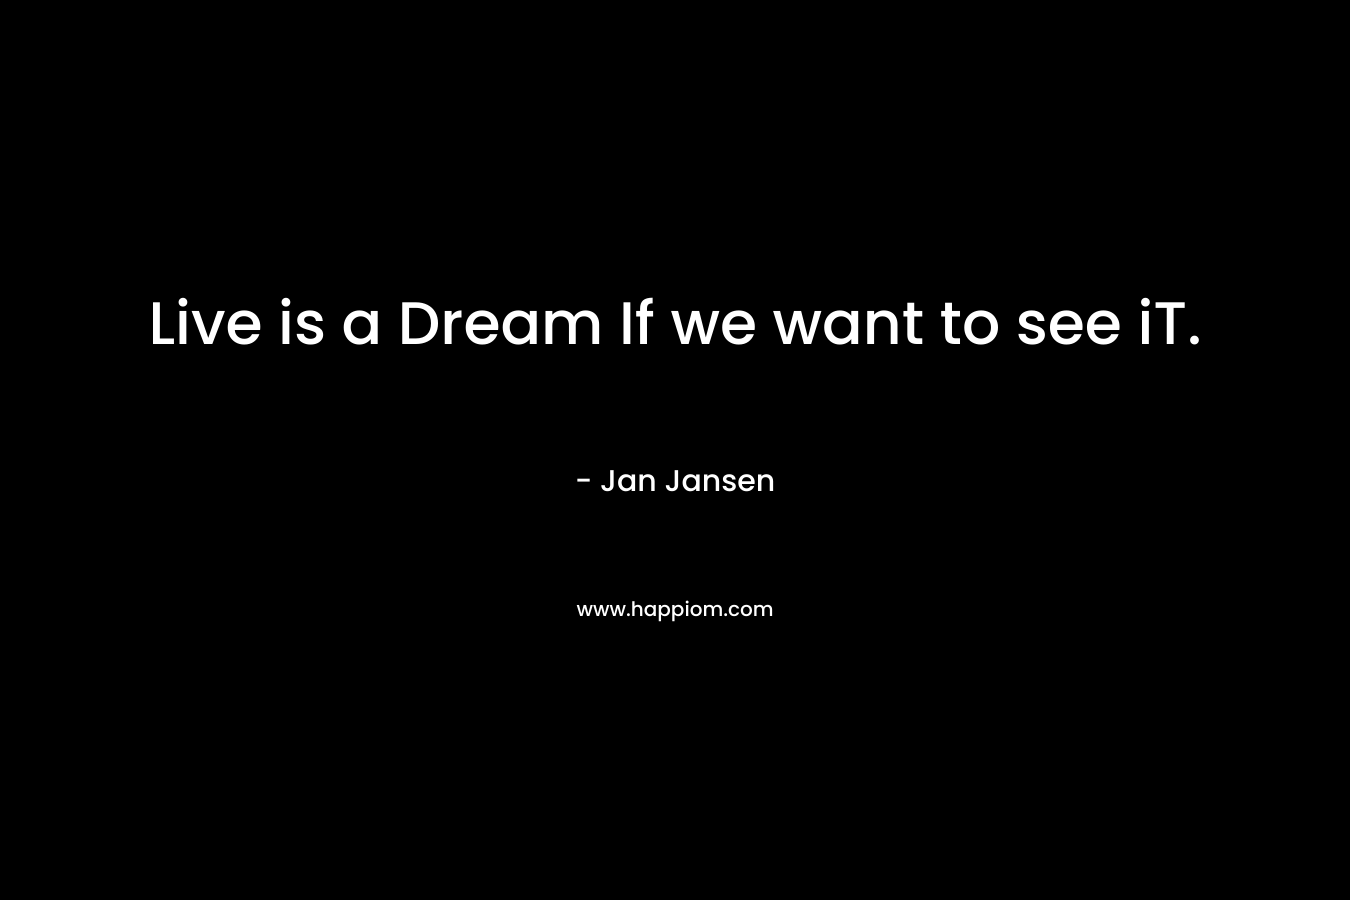 Live is a Dream If we want to see iT. – Jan Jansen